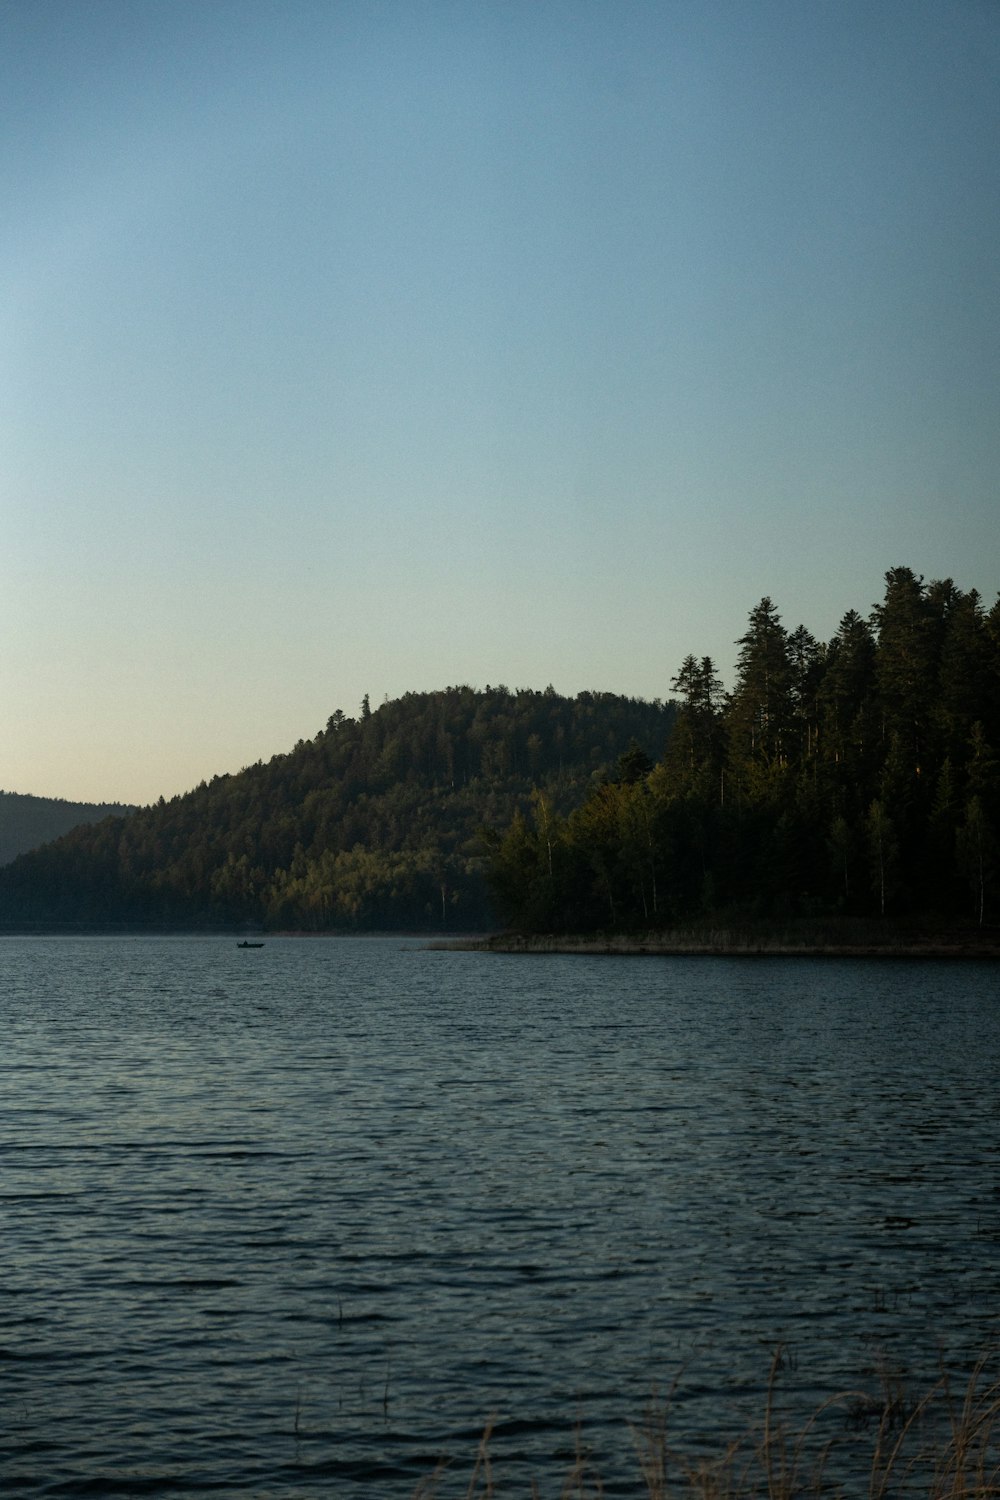 a body of water with trees on a hill in the background